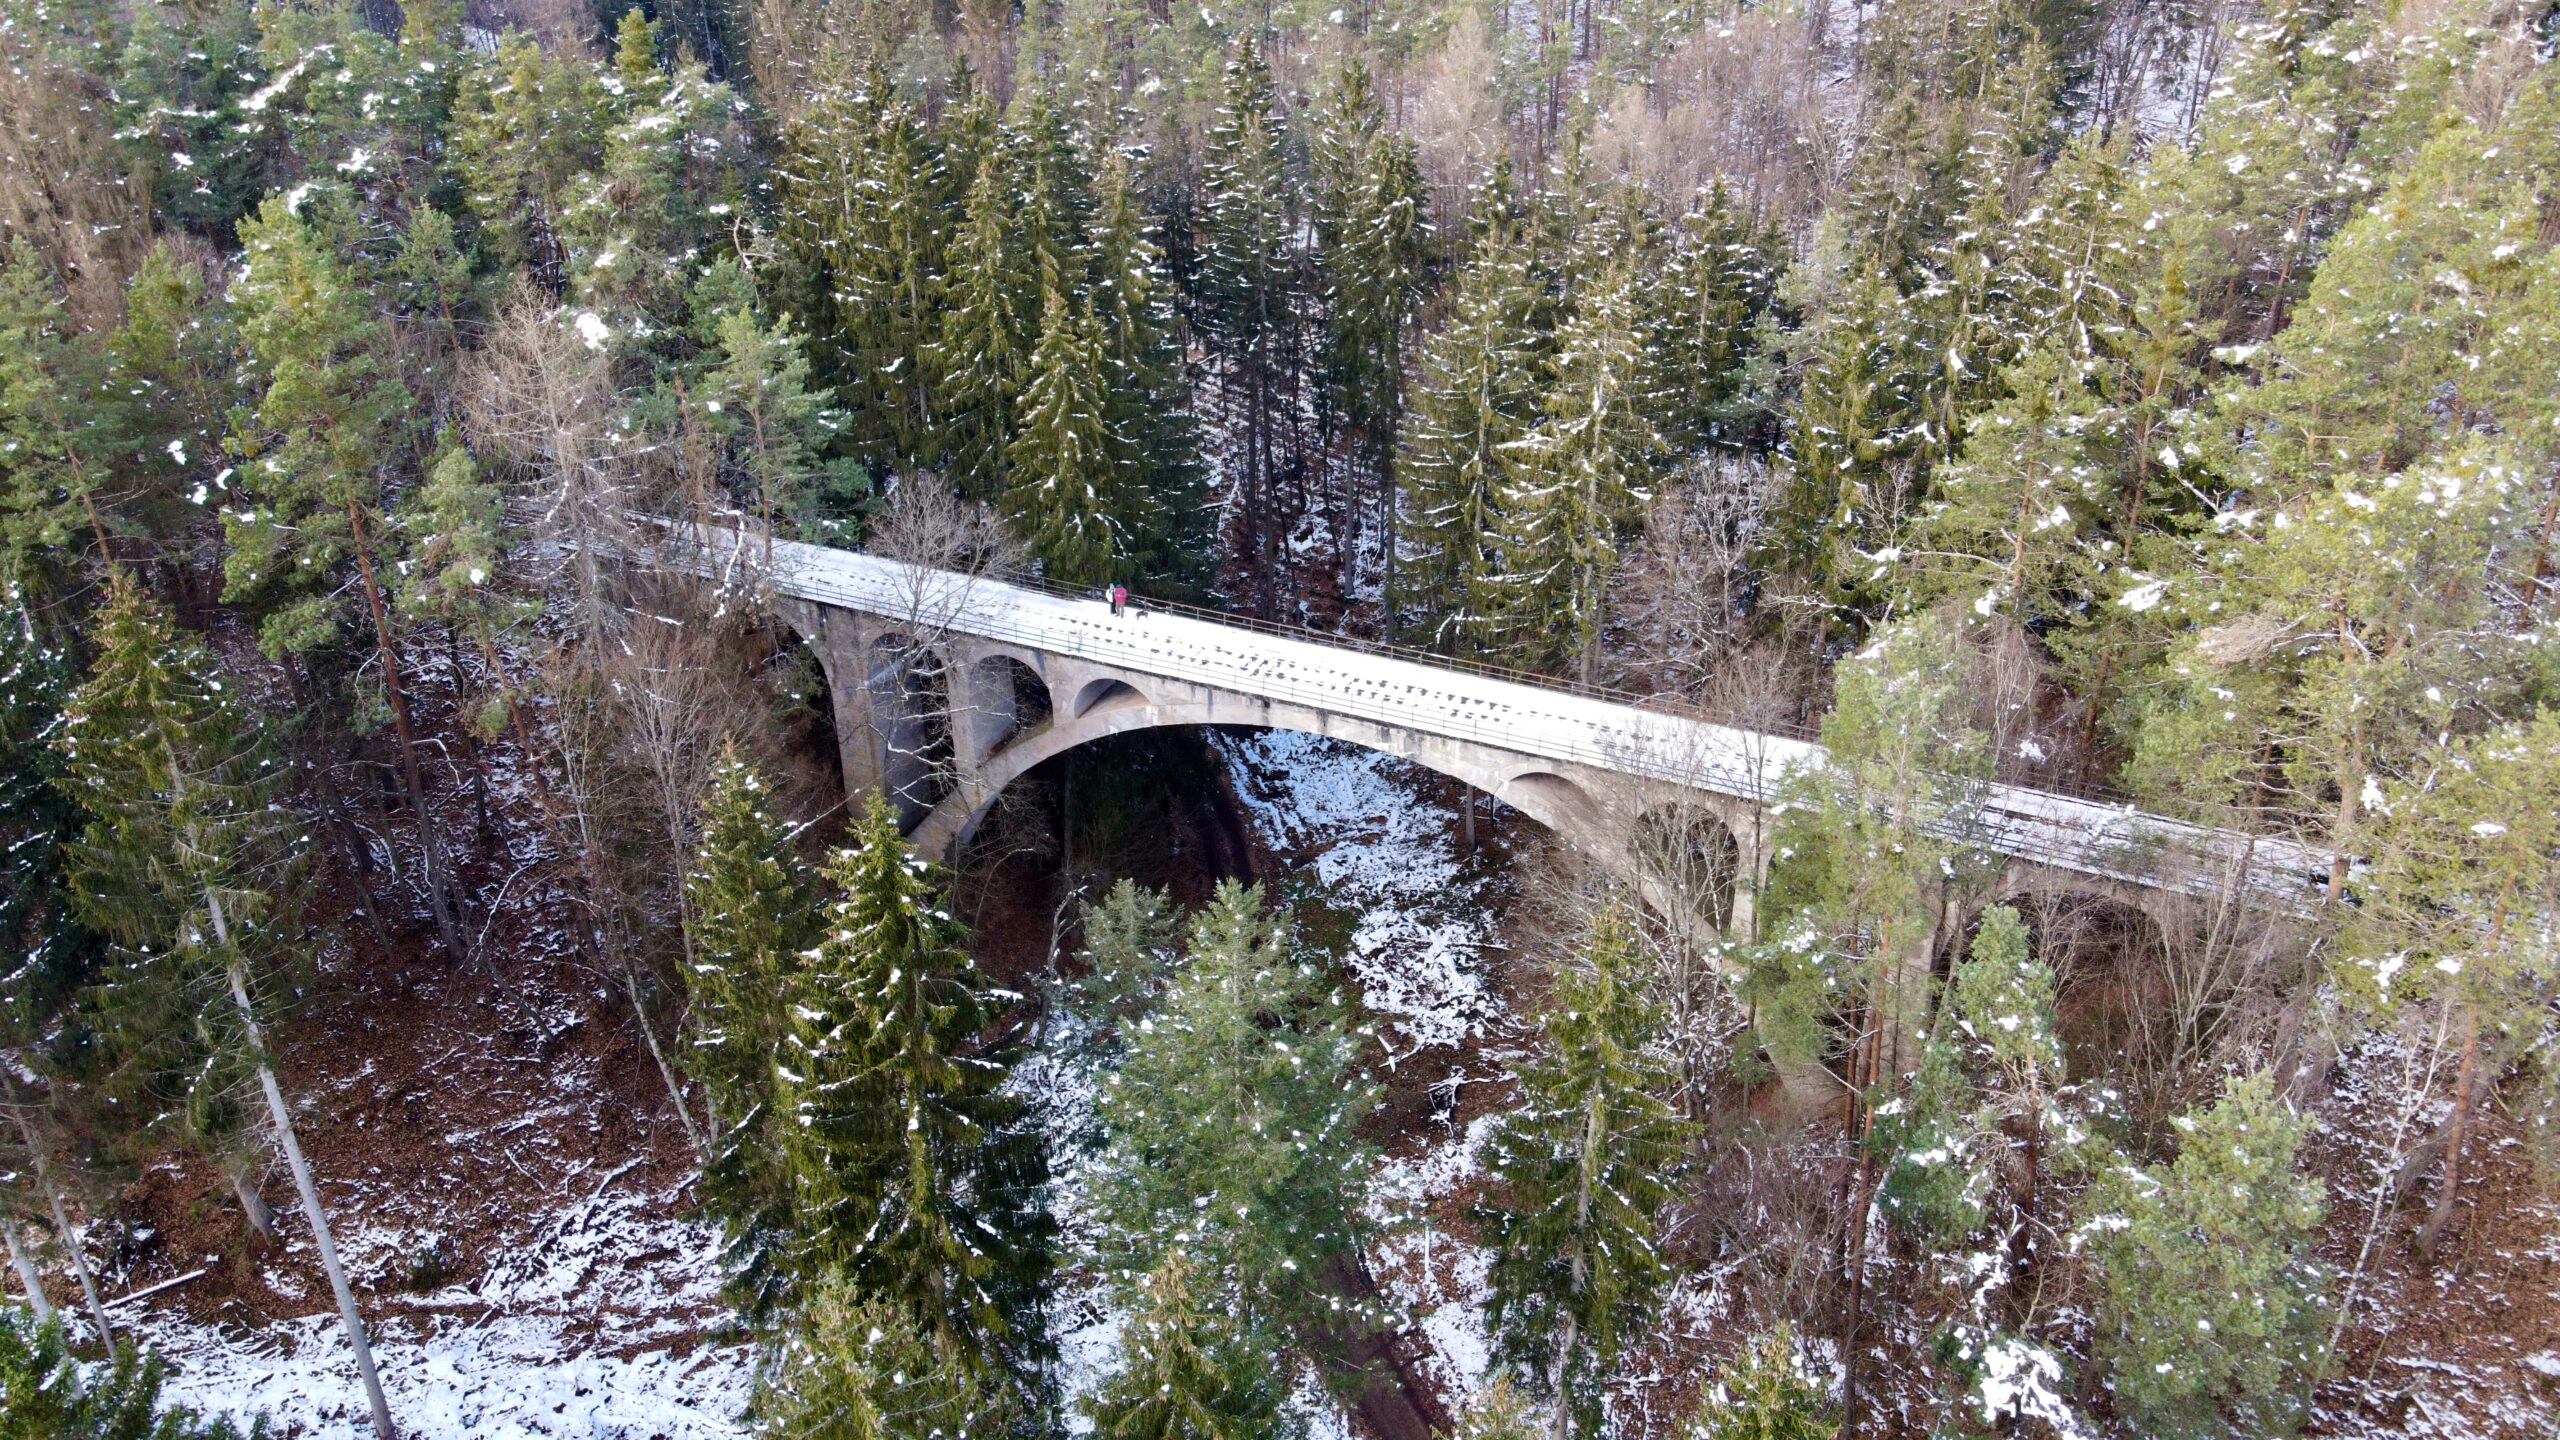 Dreibrunnertal Bridge near kaiserslautern from a drone with green forest and snow on the ground